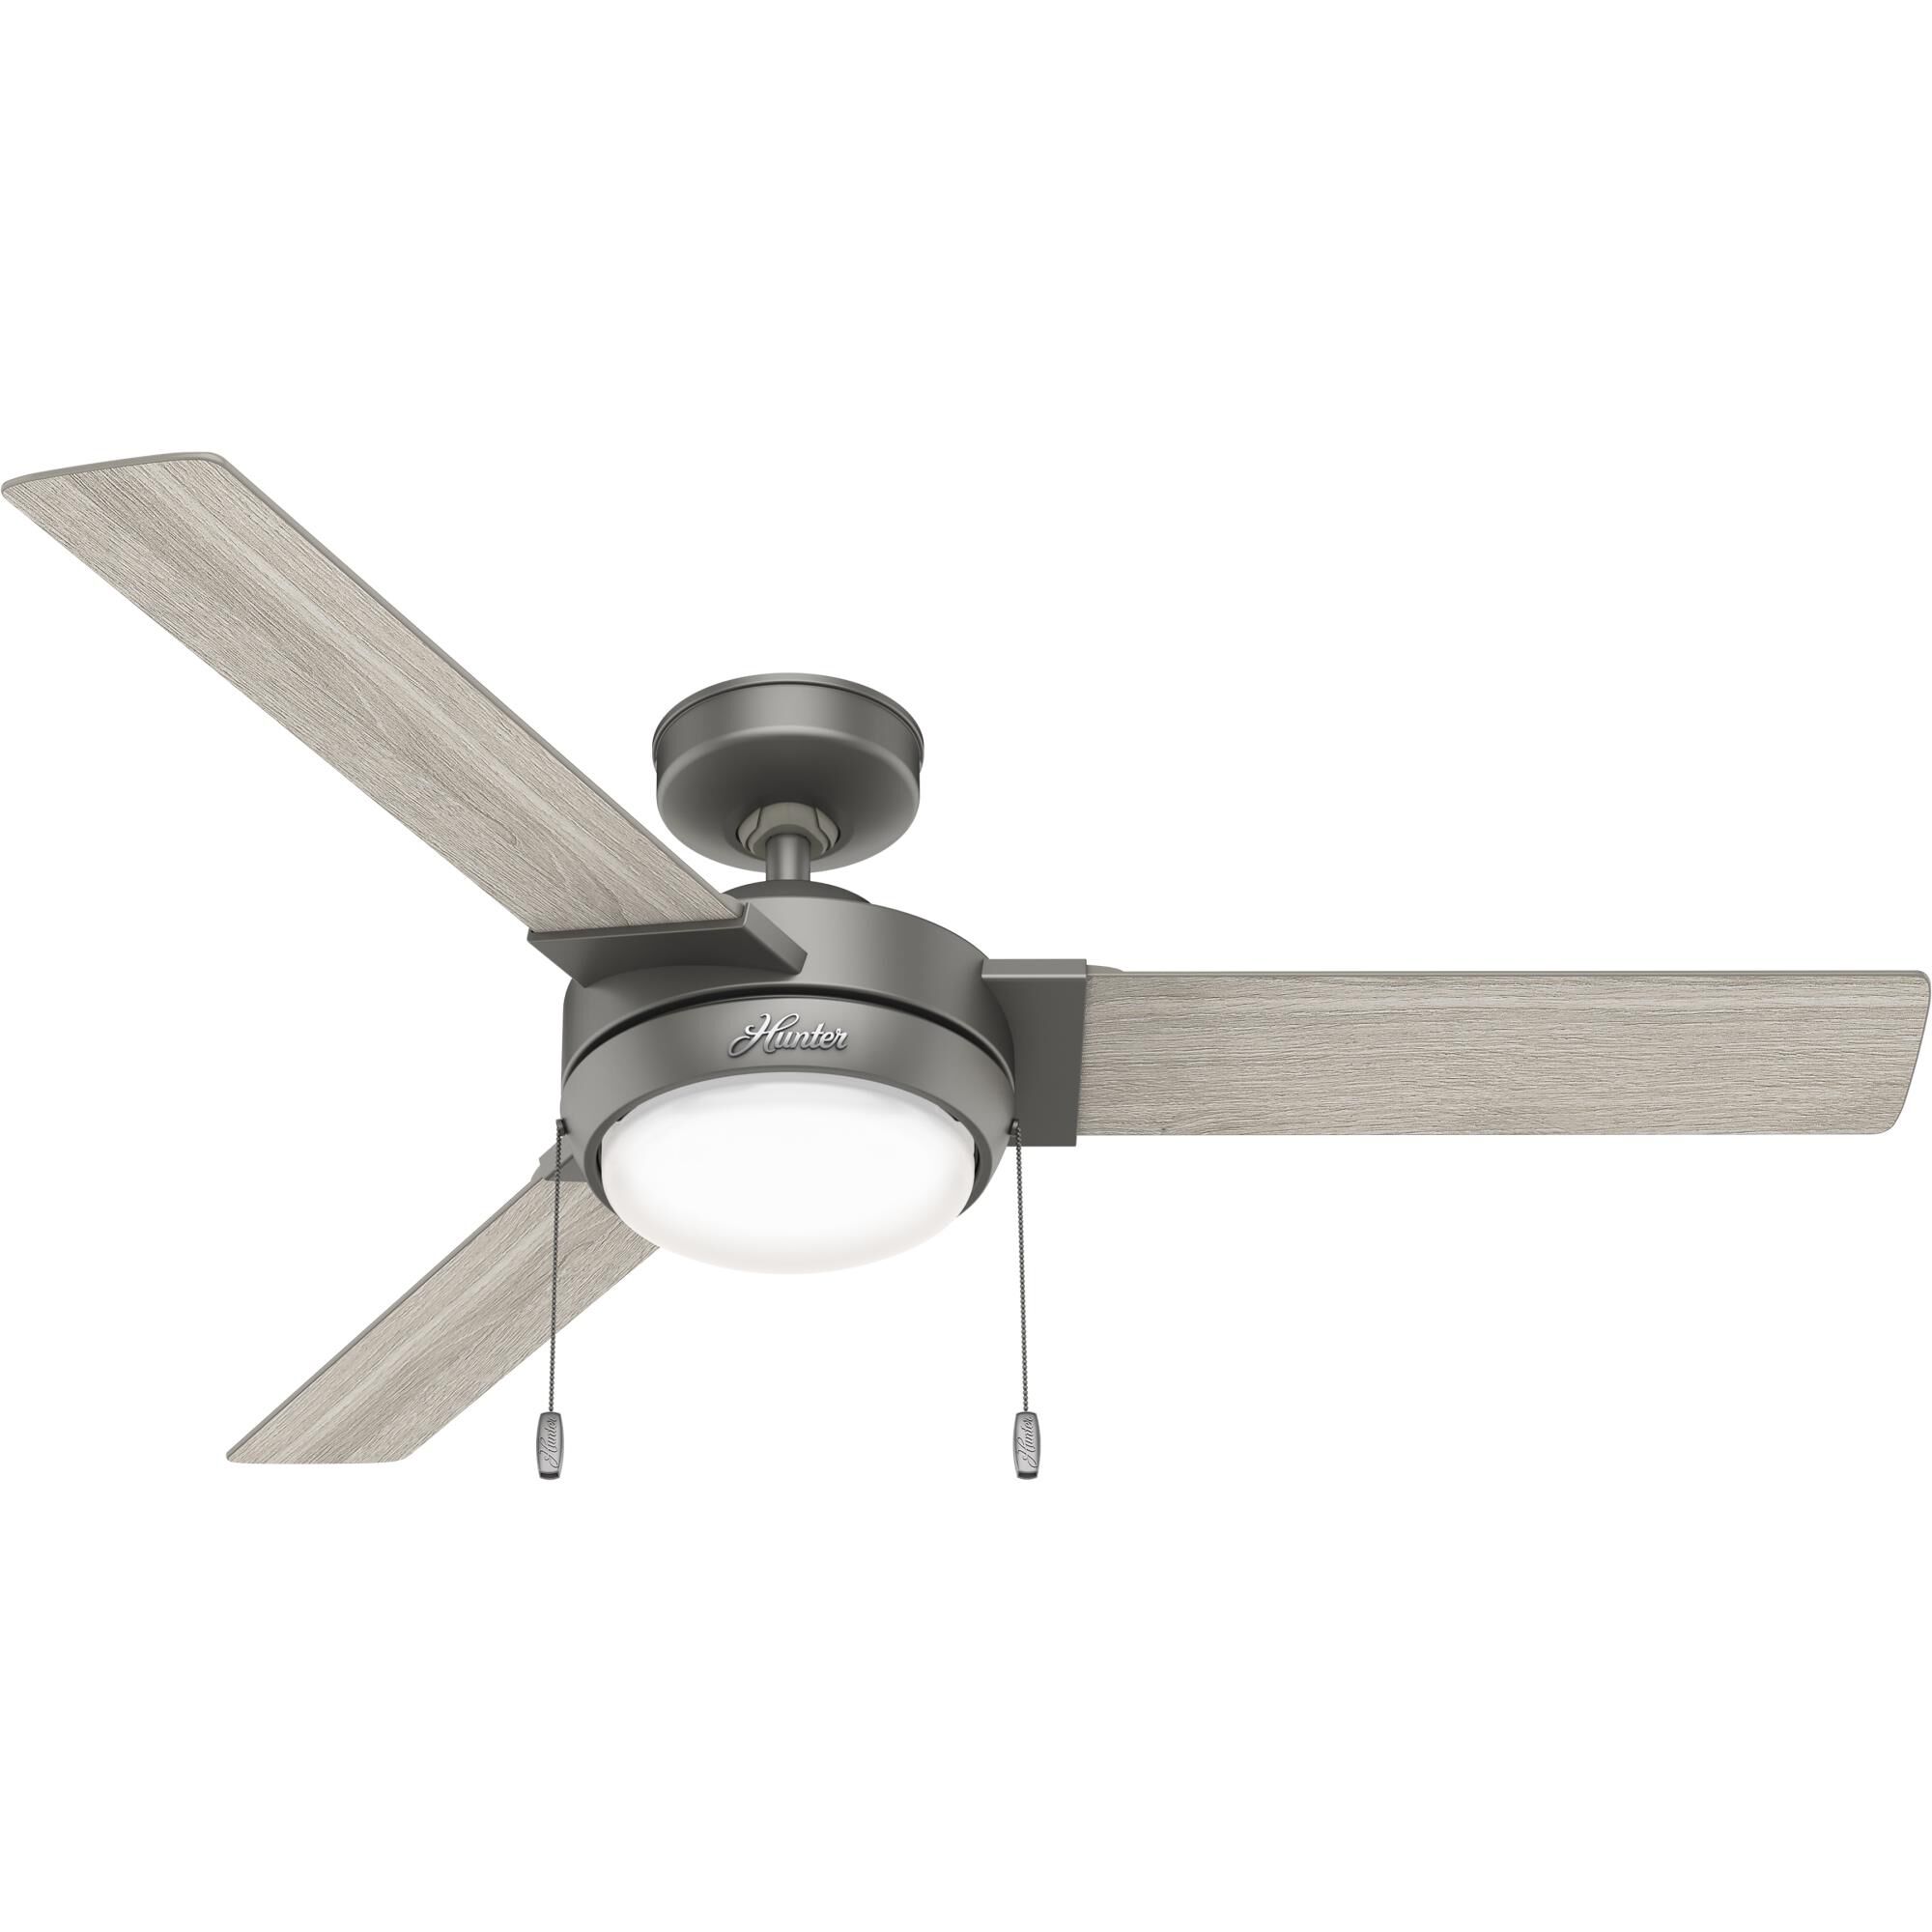 Photos - Fan Hunter  Mesquite 52 Inch Ceiling  with Light Kit Mesquite - 51311  